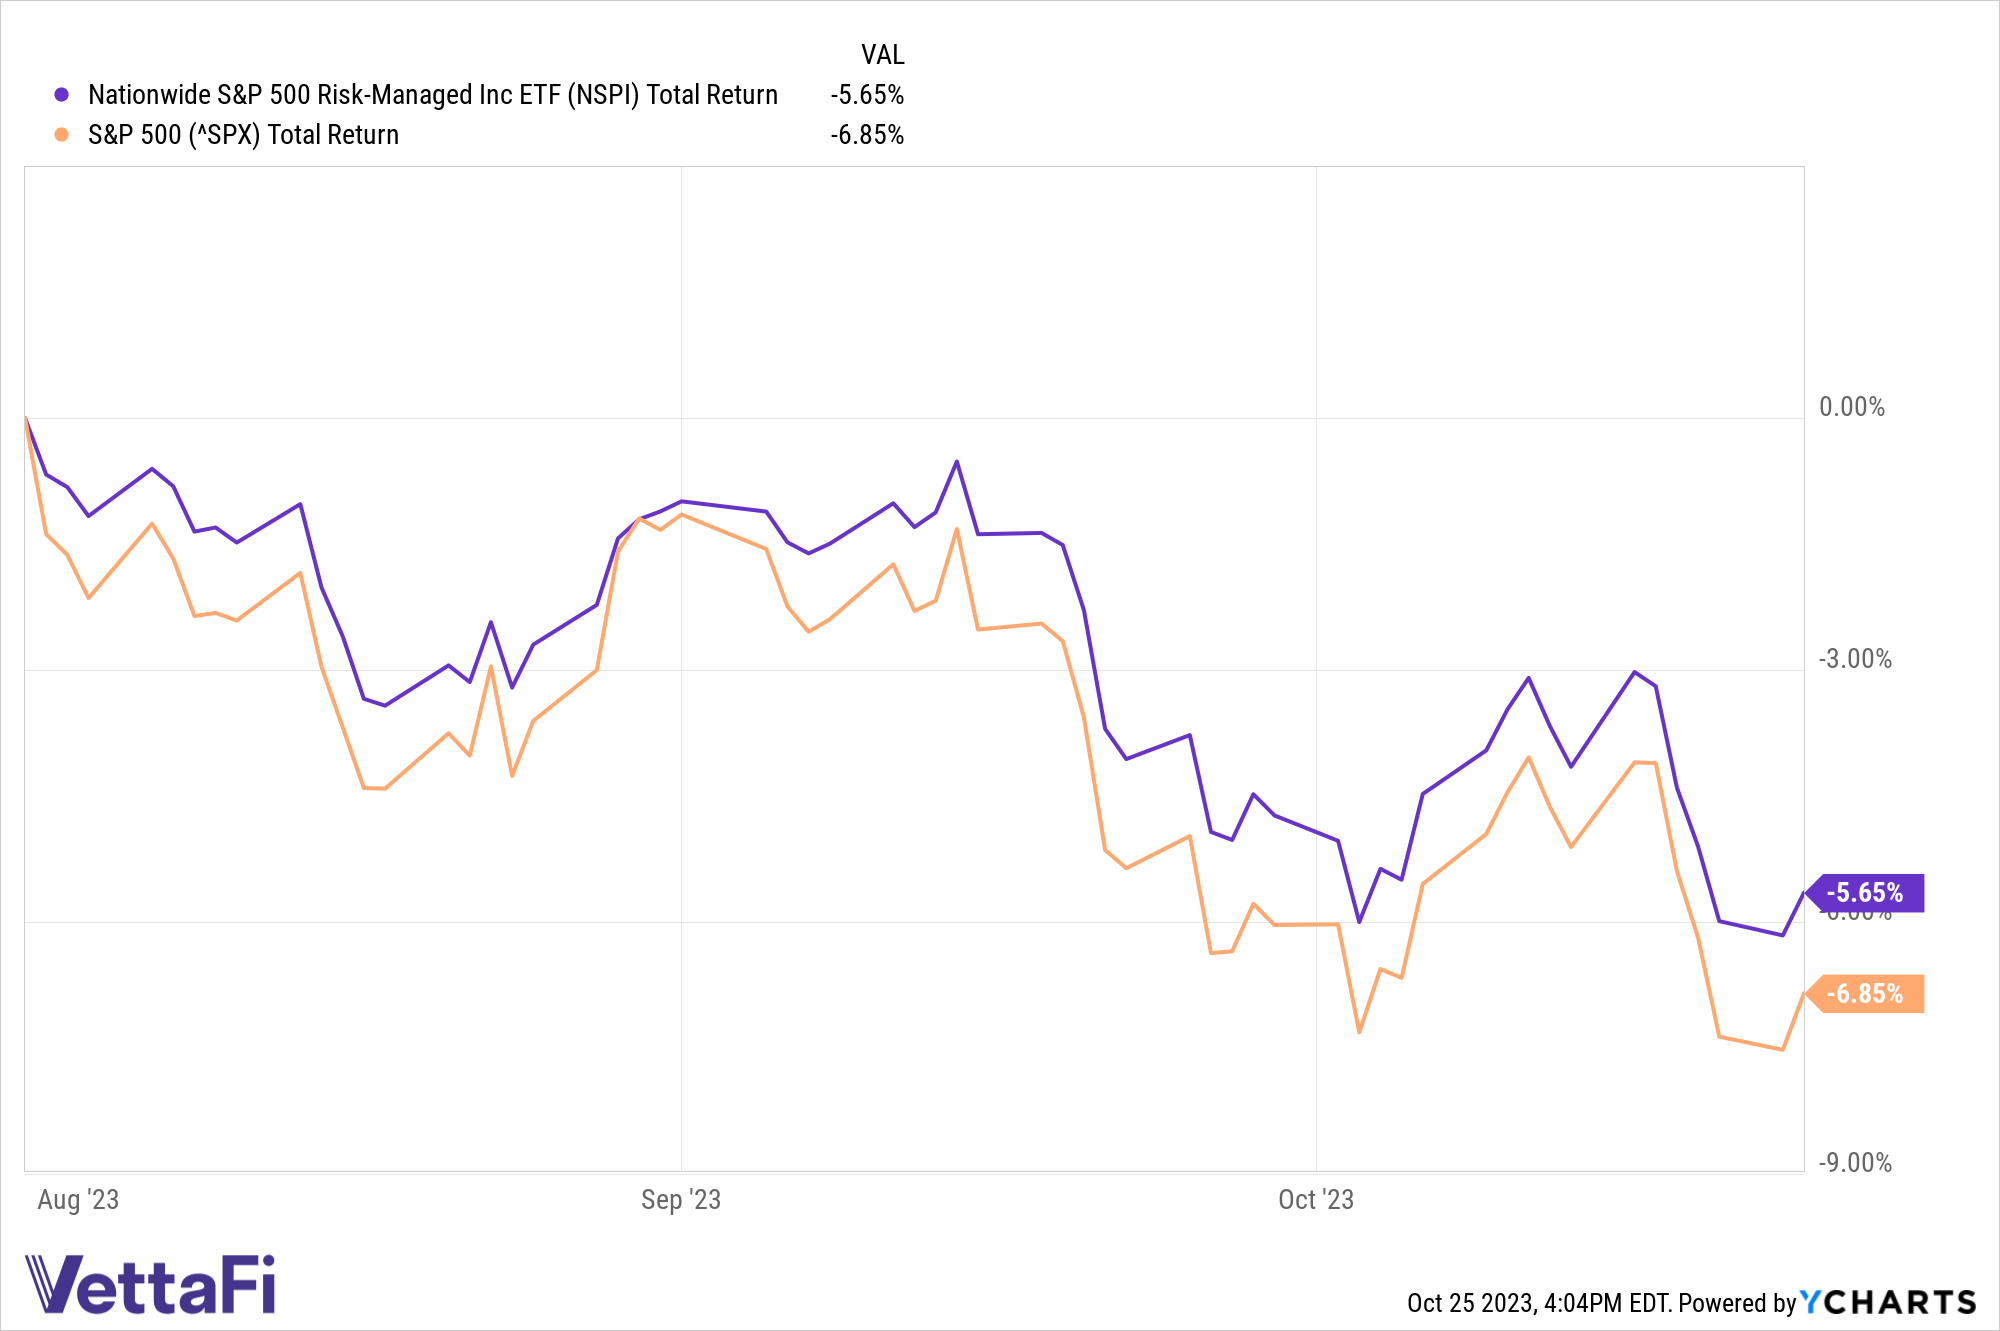 Total returns of NSPI and the S&P 500 between August 1 and October 24, 2023.